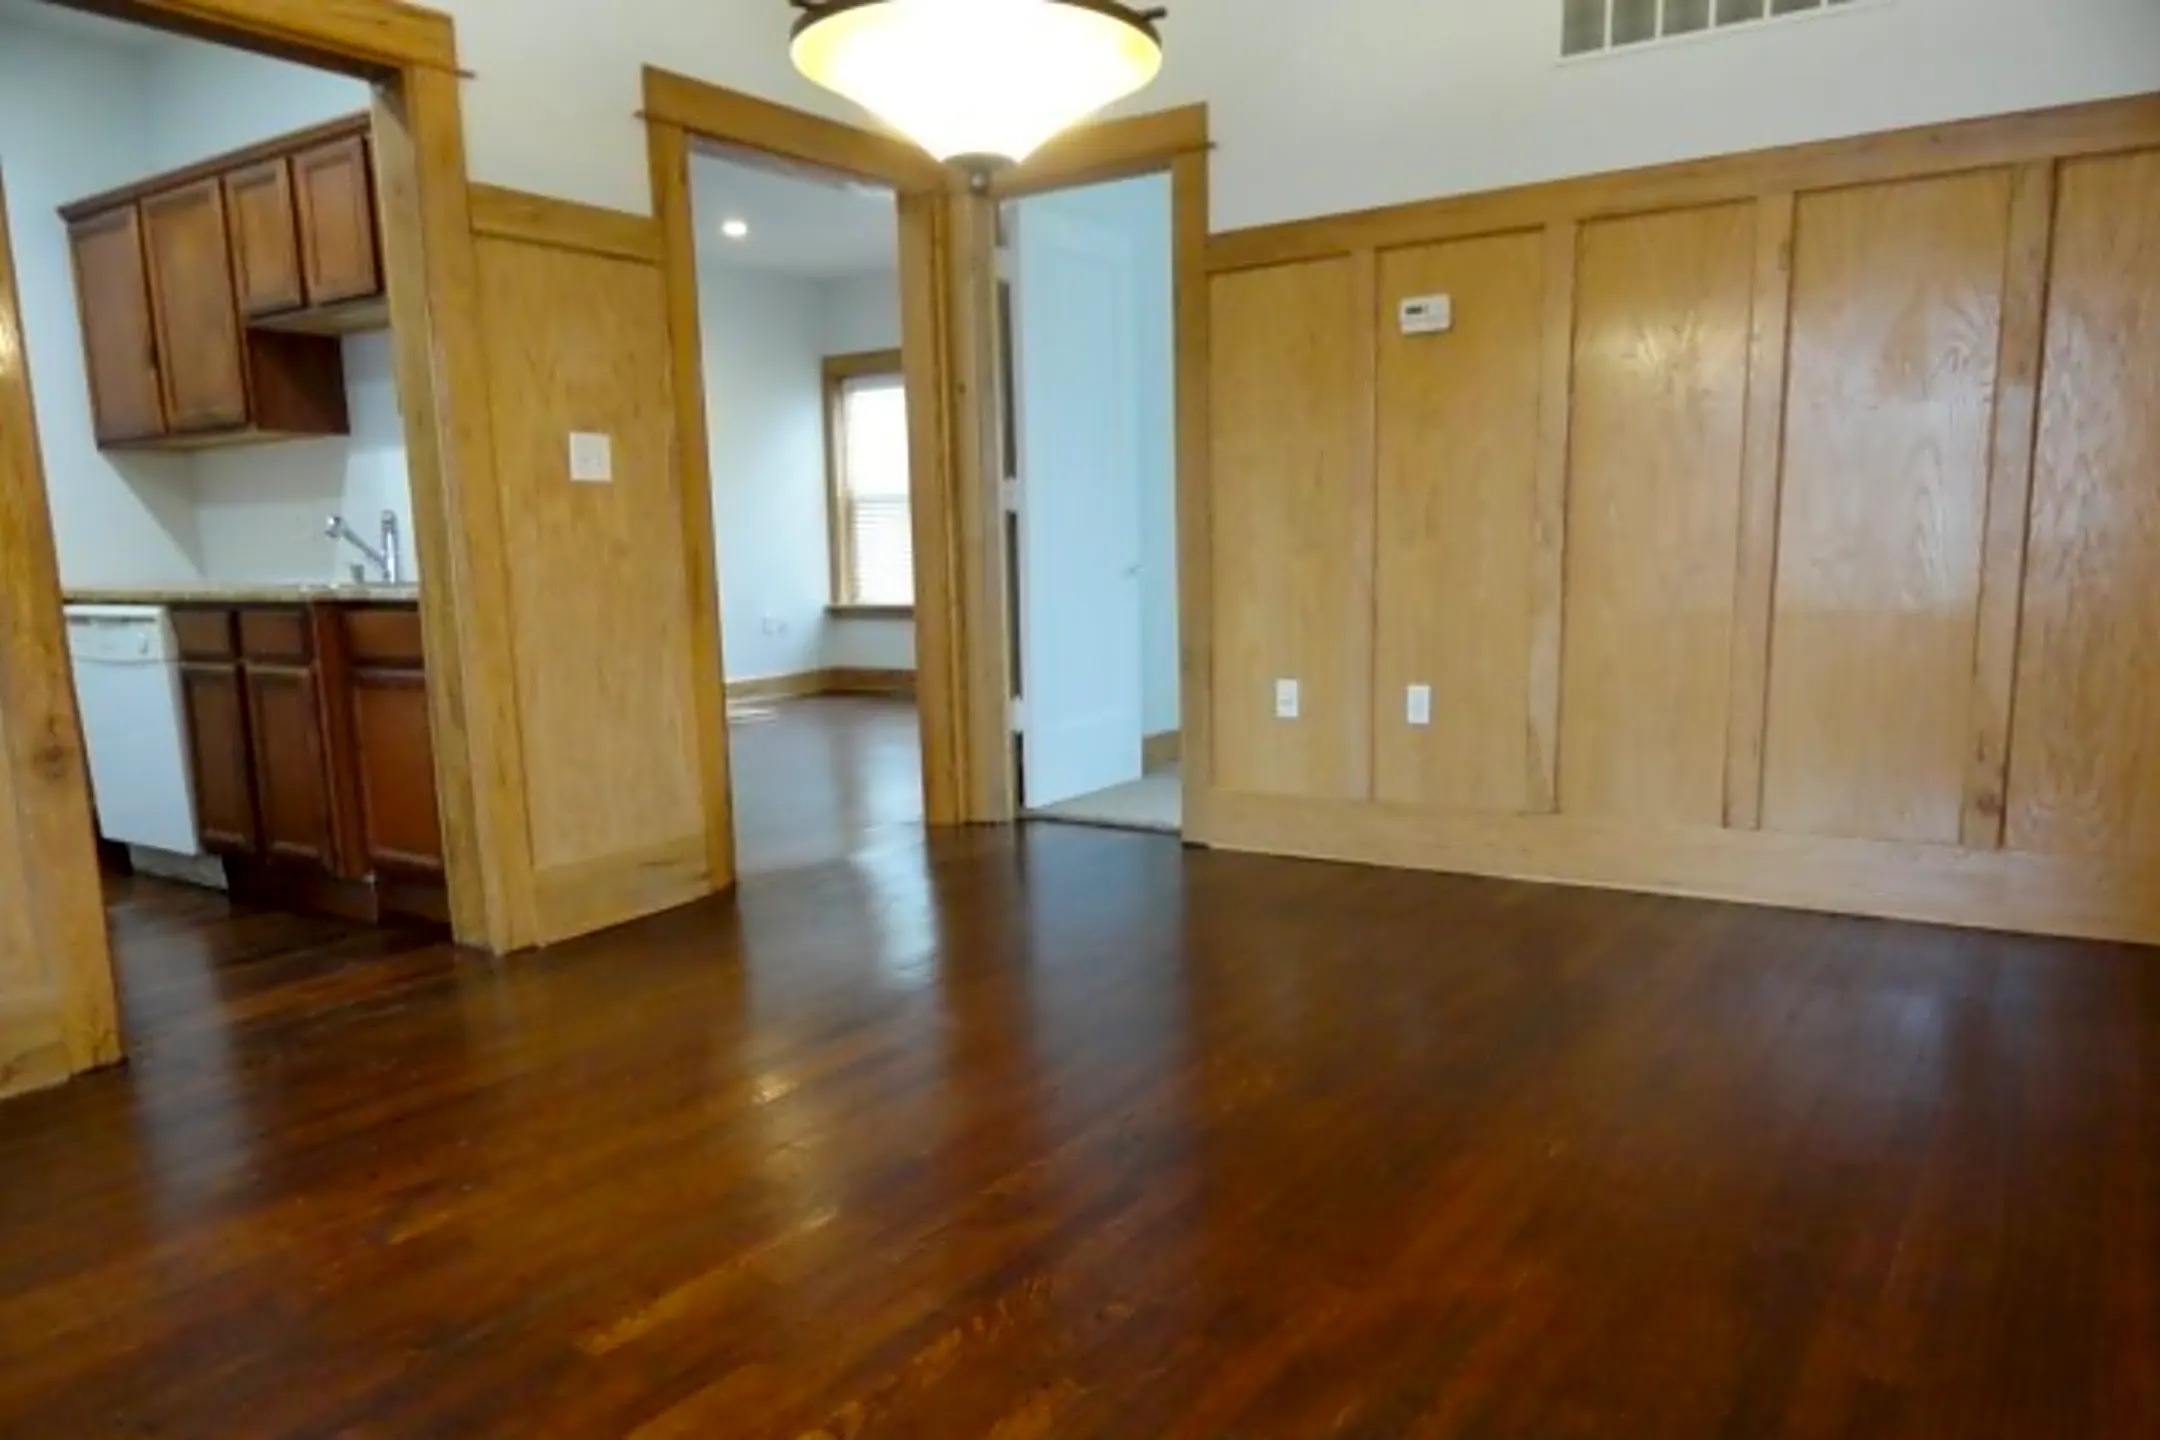 Living Room - 11433 Ashbury Ave #2 - Cleveland, OH